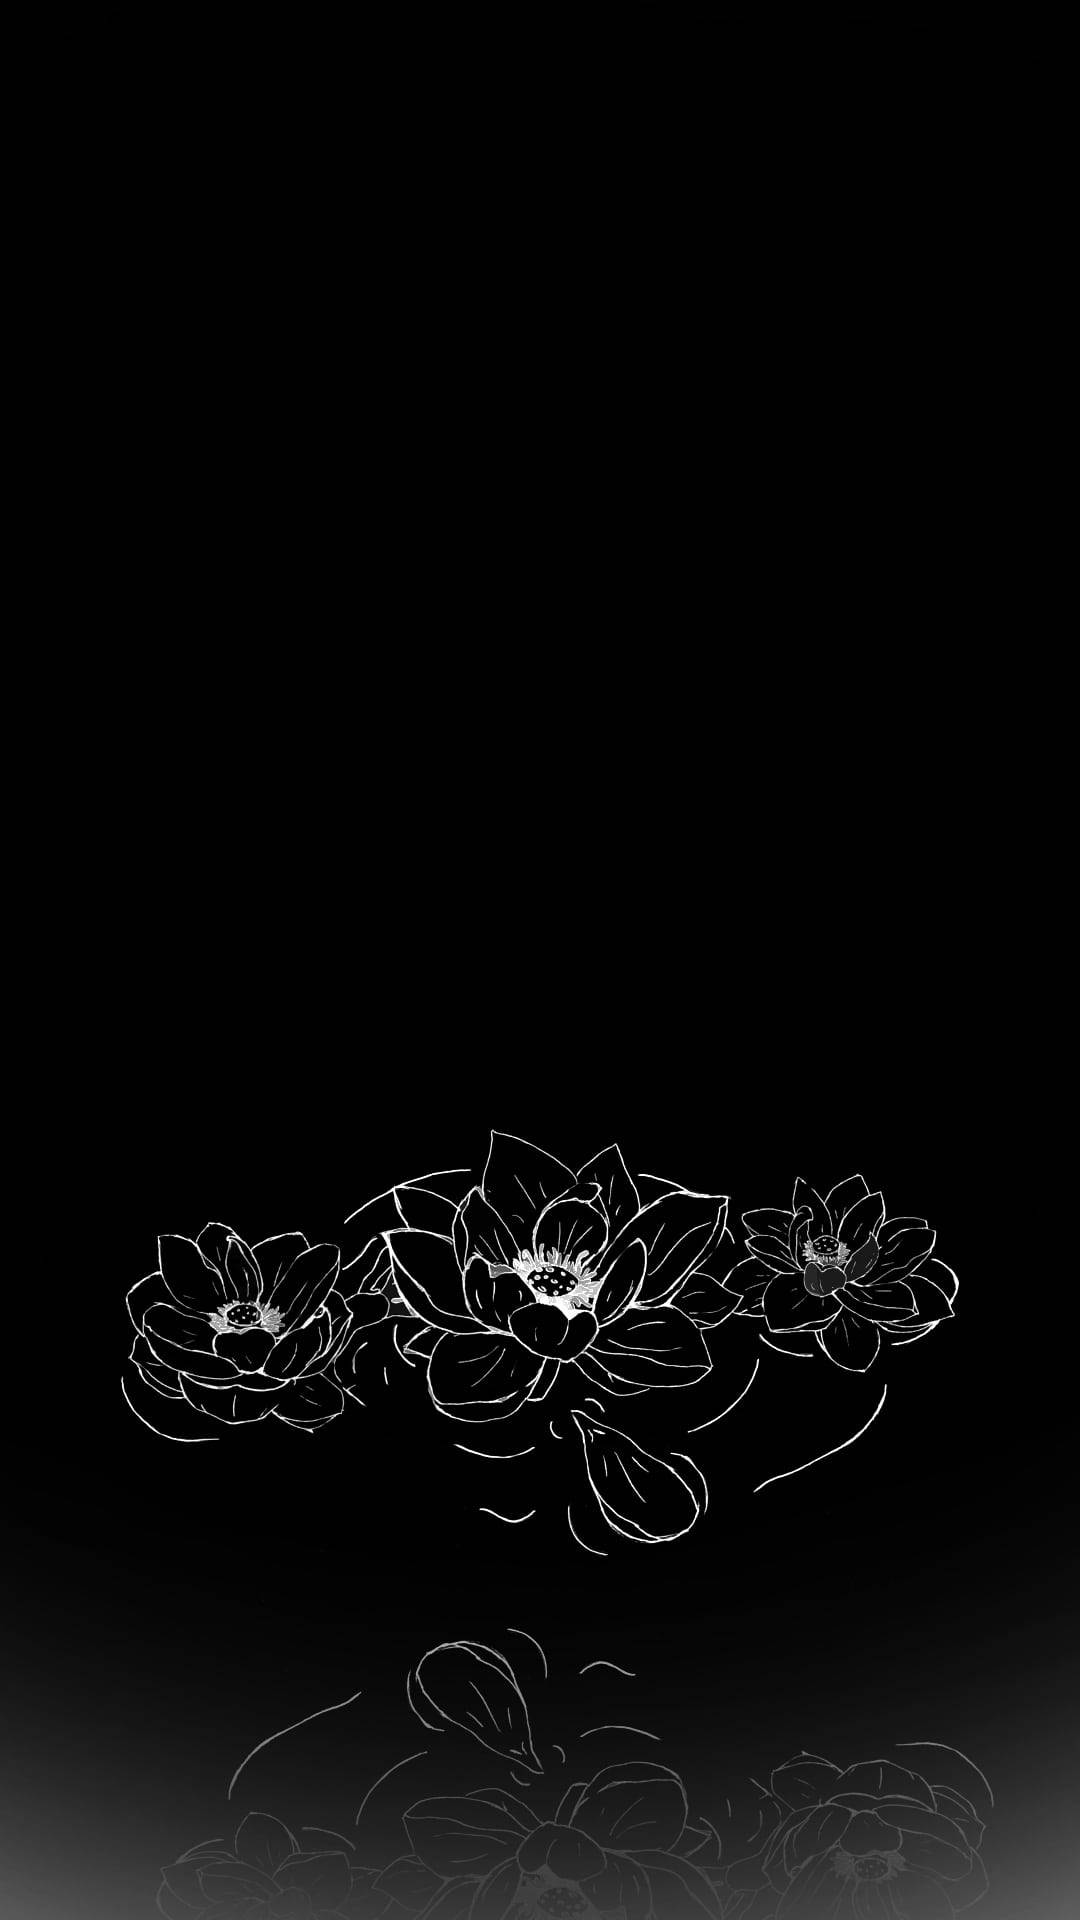 Caption: Majestic Trio Of Black And White Flowers